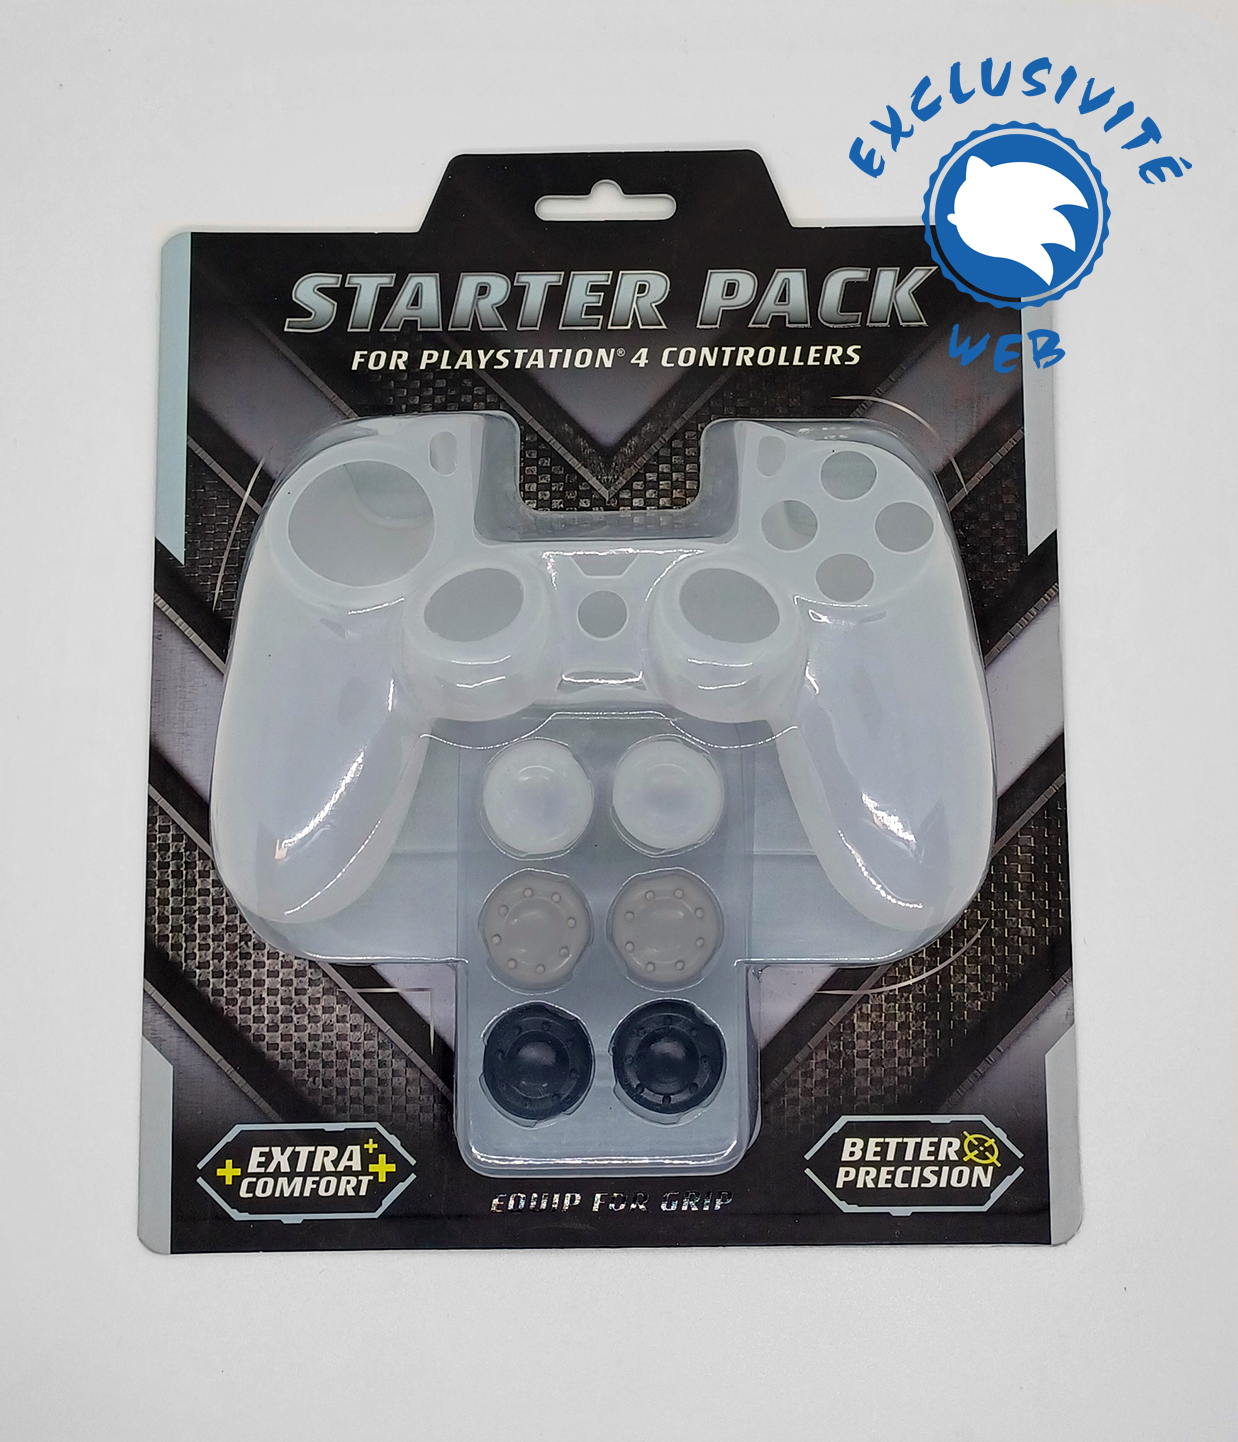 Accessoire Manette PS4 - Exclu web – Matos and Games